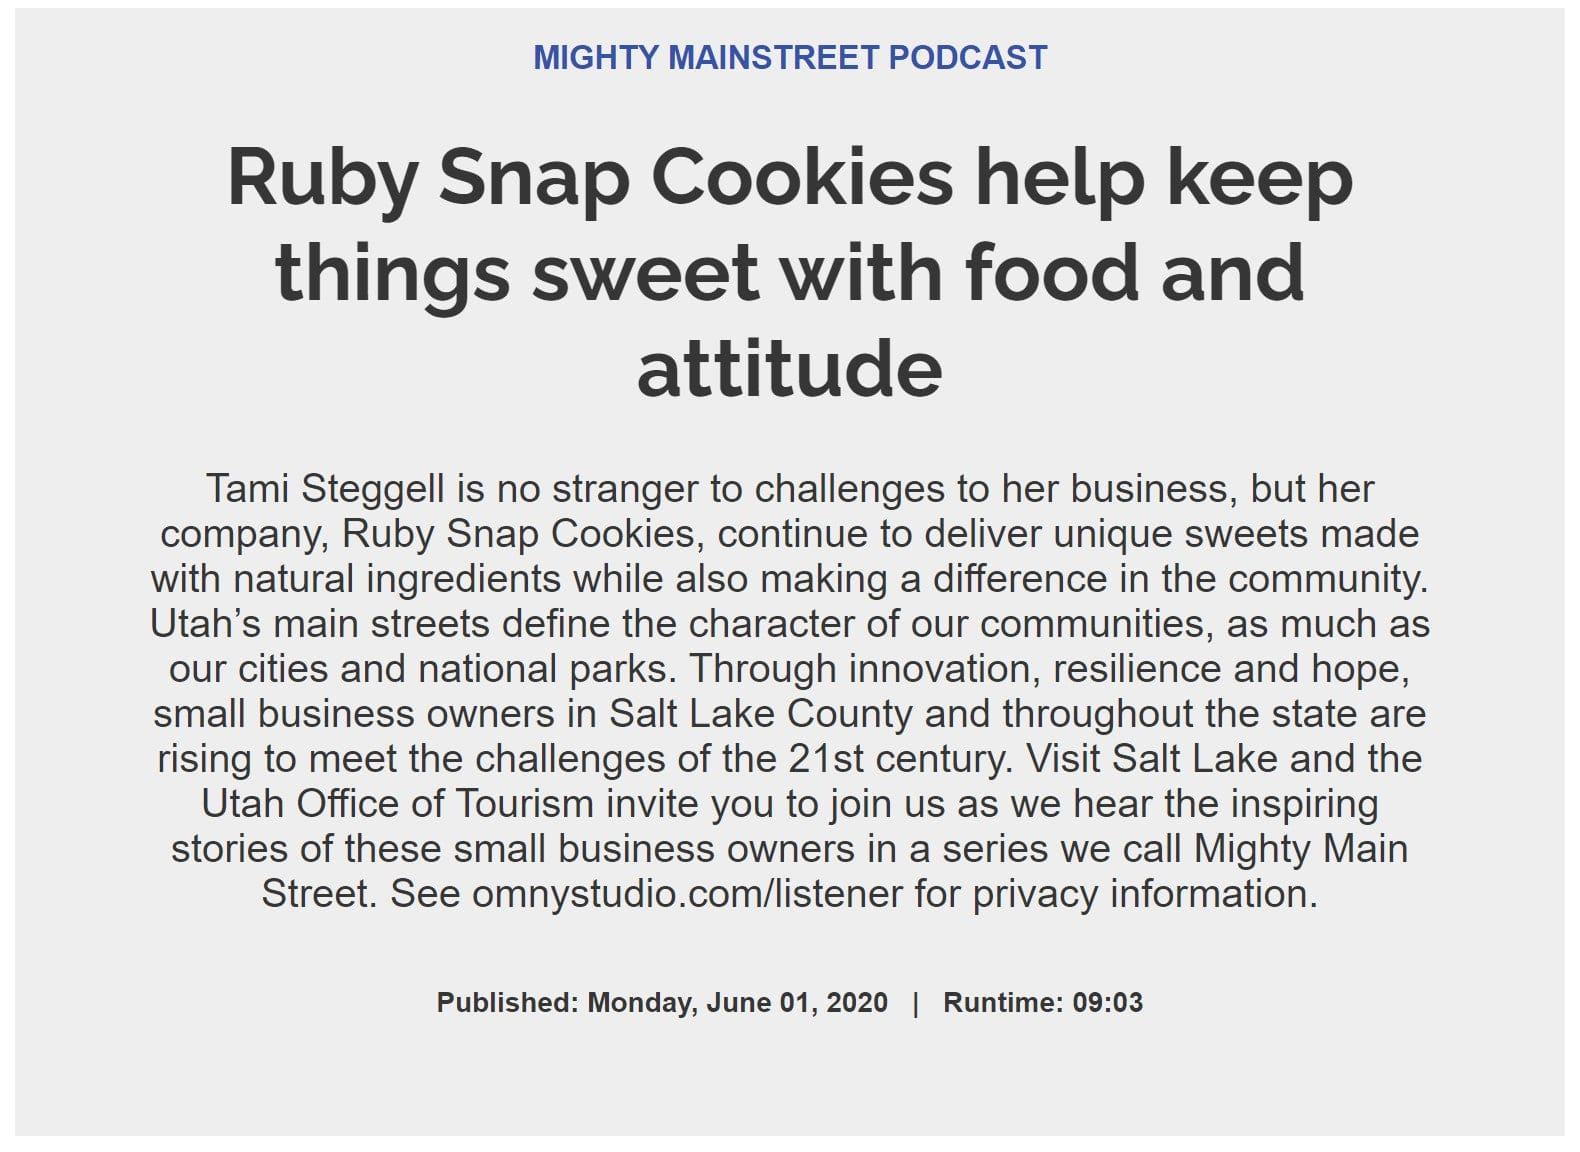 RubySnap Cookies Help Keep Things Sweet with Food and Attitude